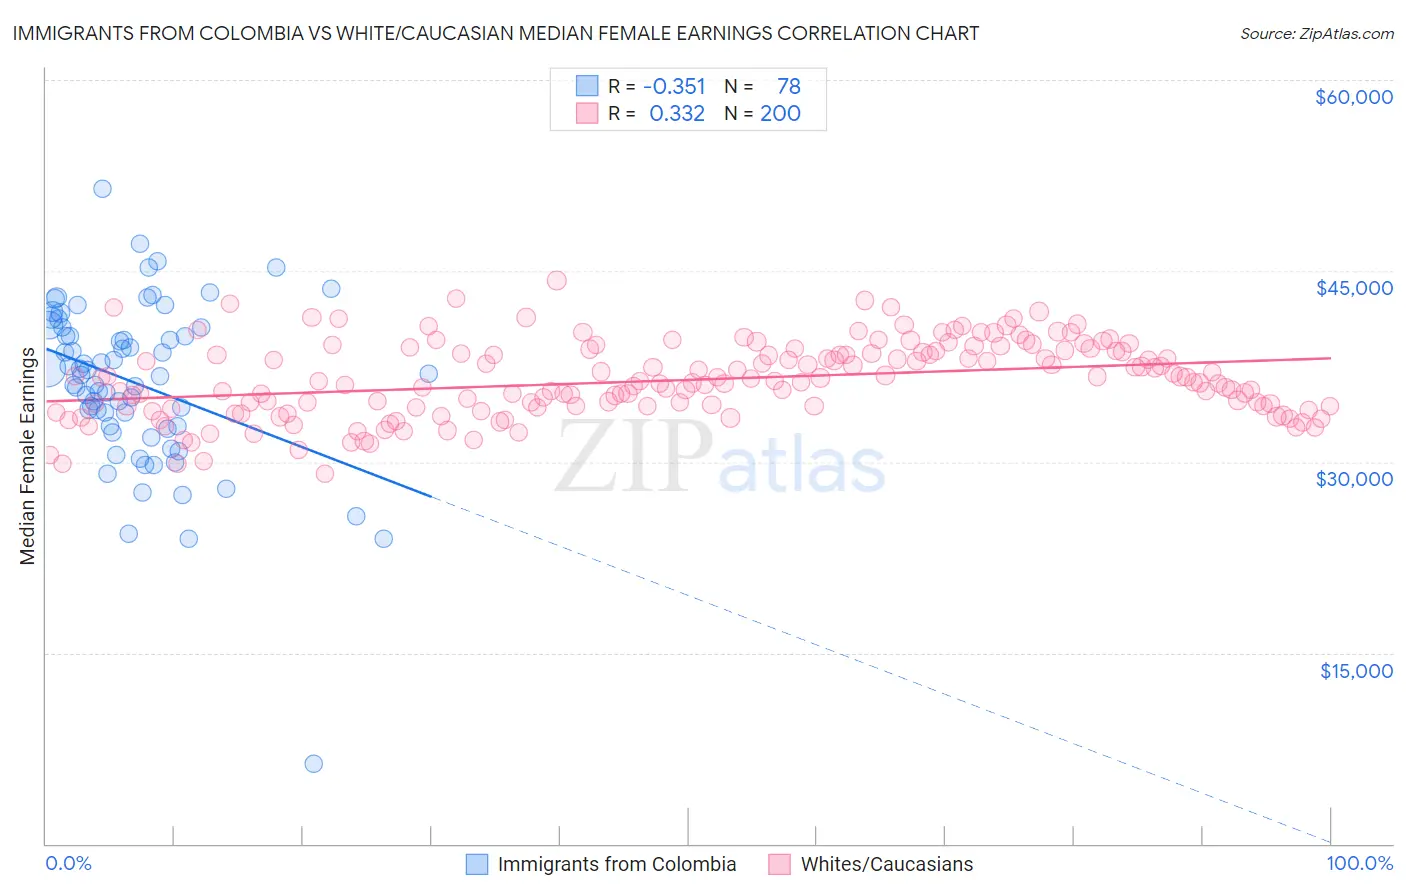 Immigrants from Colombia vs White/Caucasian Median Female Earnings